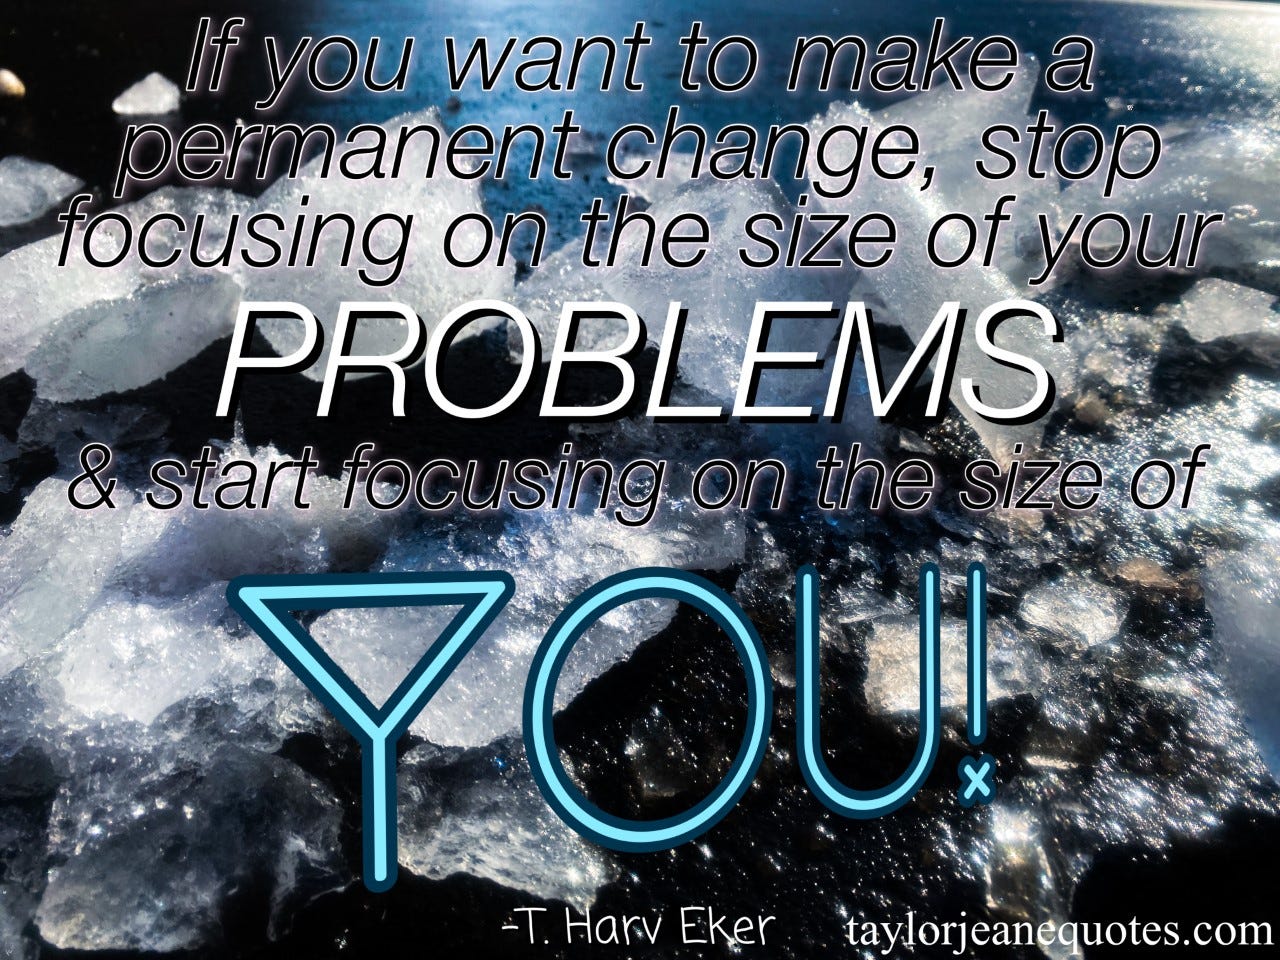 taylor jeane quotes, taylor jeane, taylor wilson, t harv eker, t harv eker quotes, quote of the day, motivational quotes daily, motivational quotes, inspirational quotes, positive quotes, problem quotes, overcome challenges quotes, change quotes, empowering change quotes, self love quotes, self empowerment quotes, self worth quotes, quotes for a bad day, goal quotes, goal setting quotes, life quotes